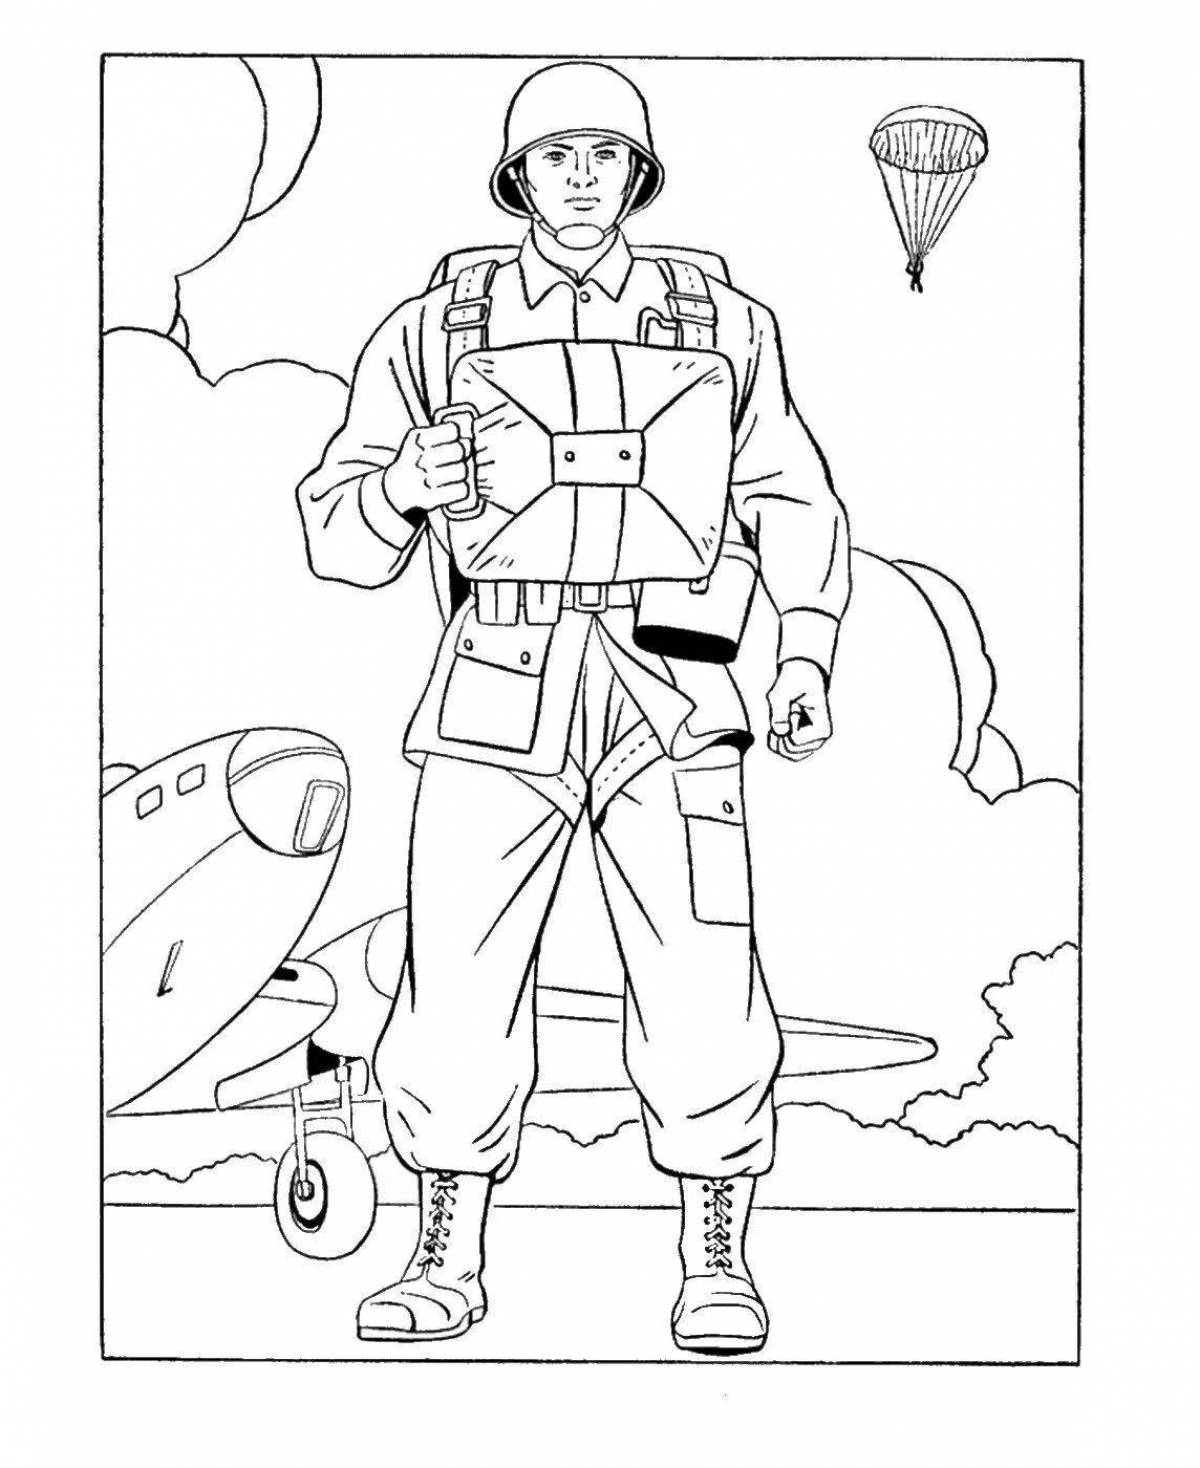 Living Russian soldier coloring pages for kids